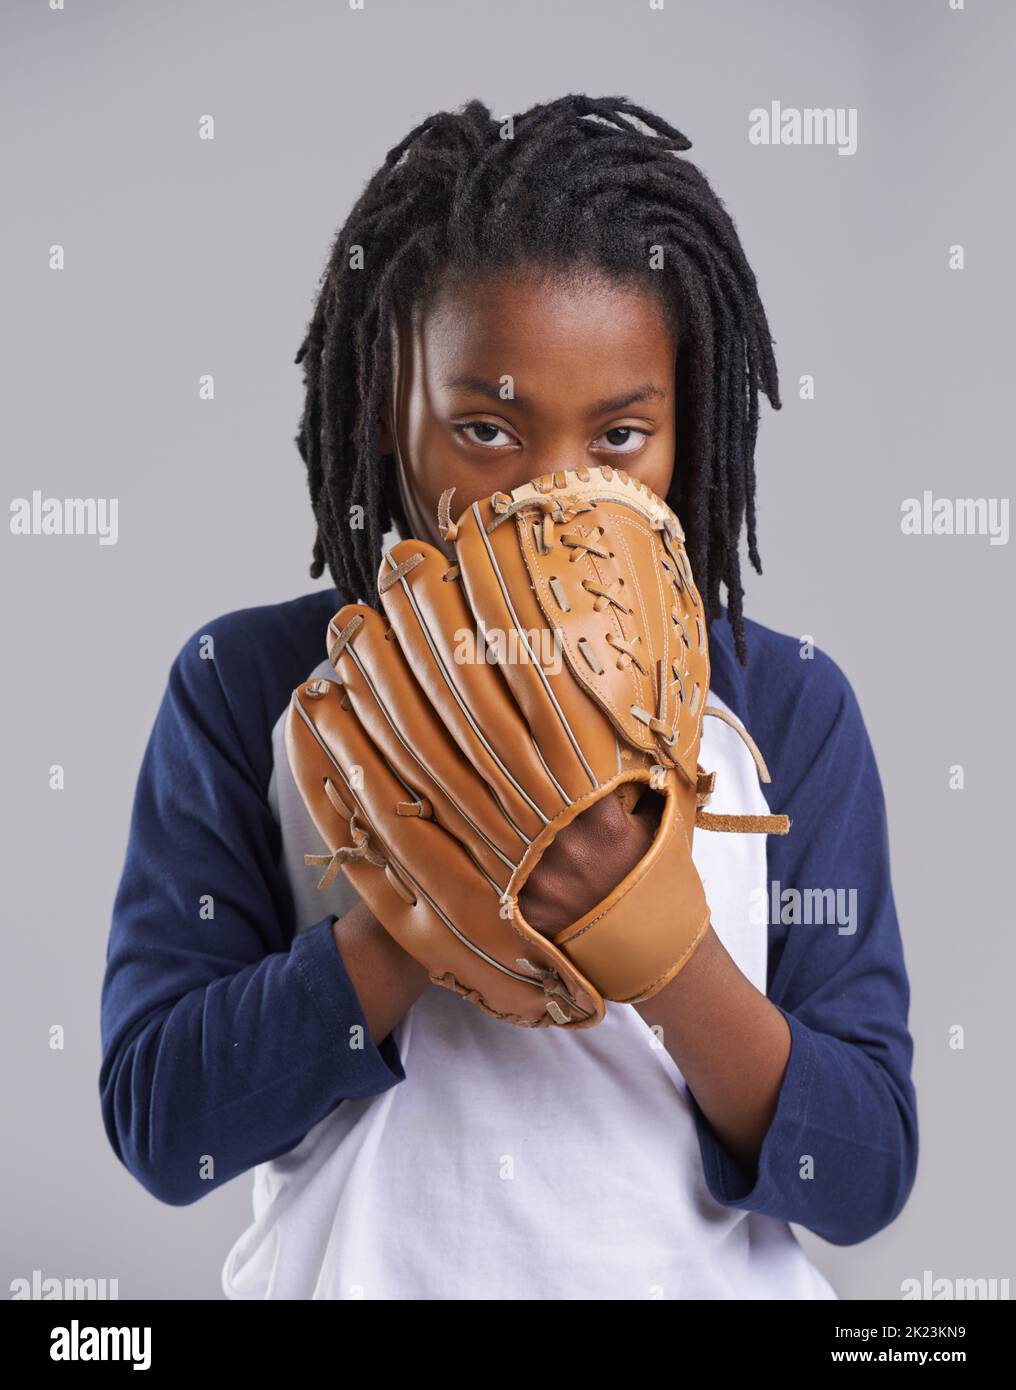 You wont know what hit you. Studio shot of a young boy with baseball gear. Stock Photo